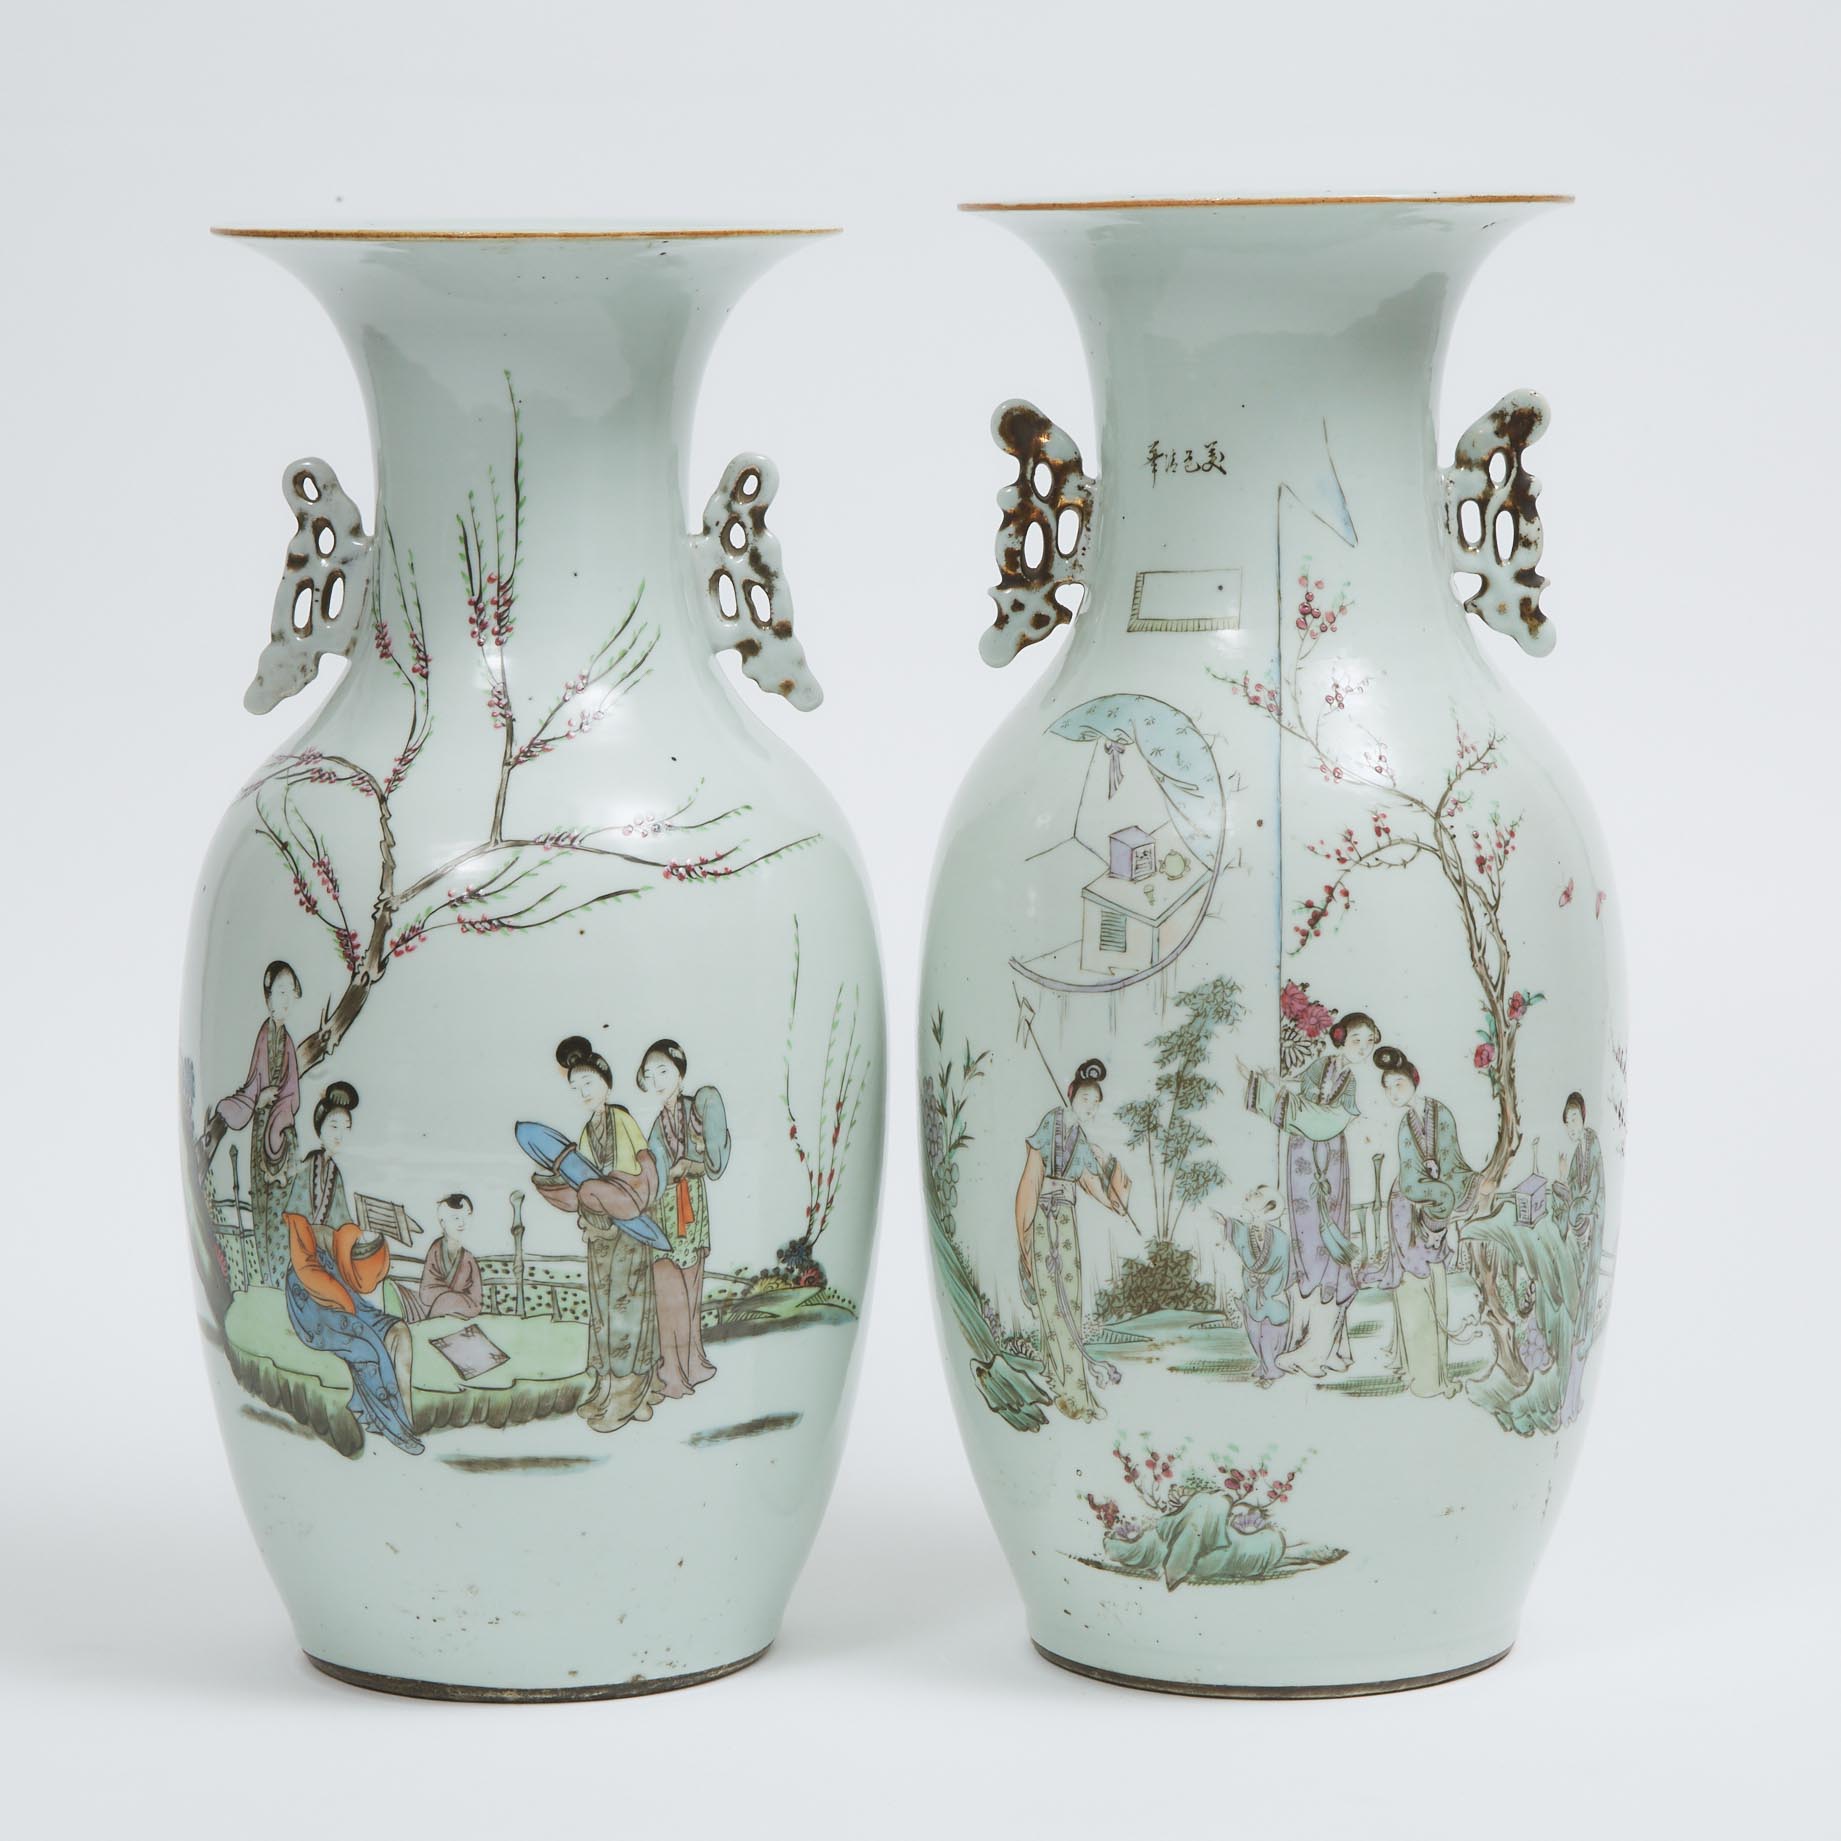 Two Polychrome Enameled Vases with Figures and Calligraphy, Republican Period